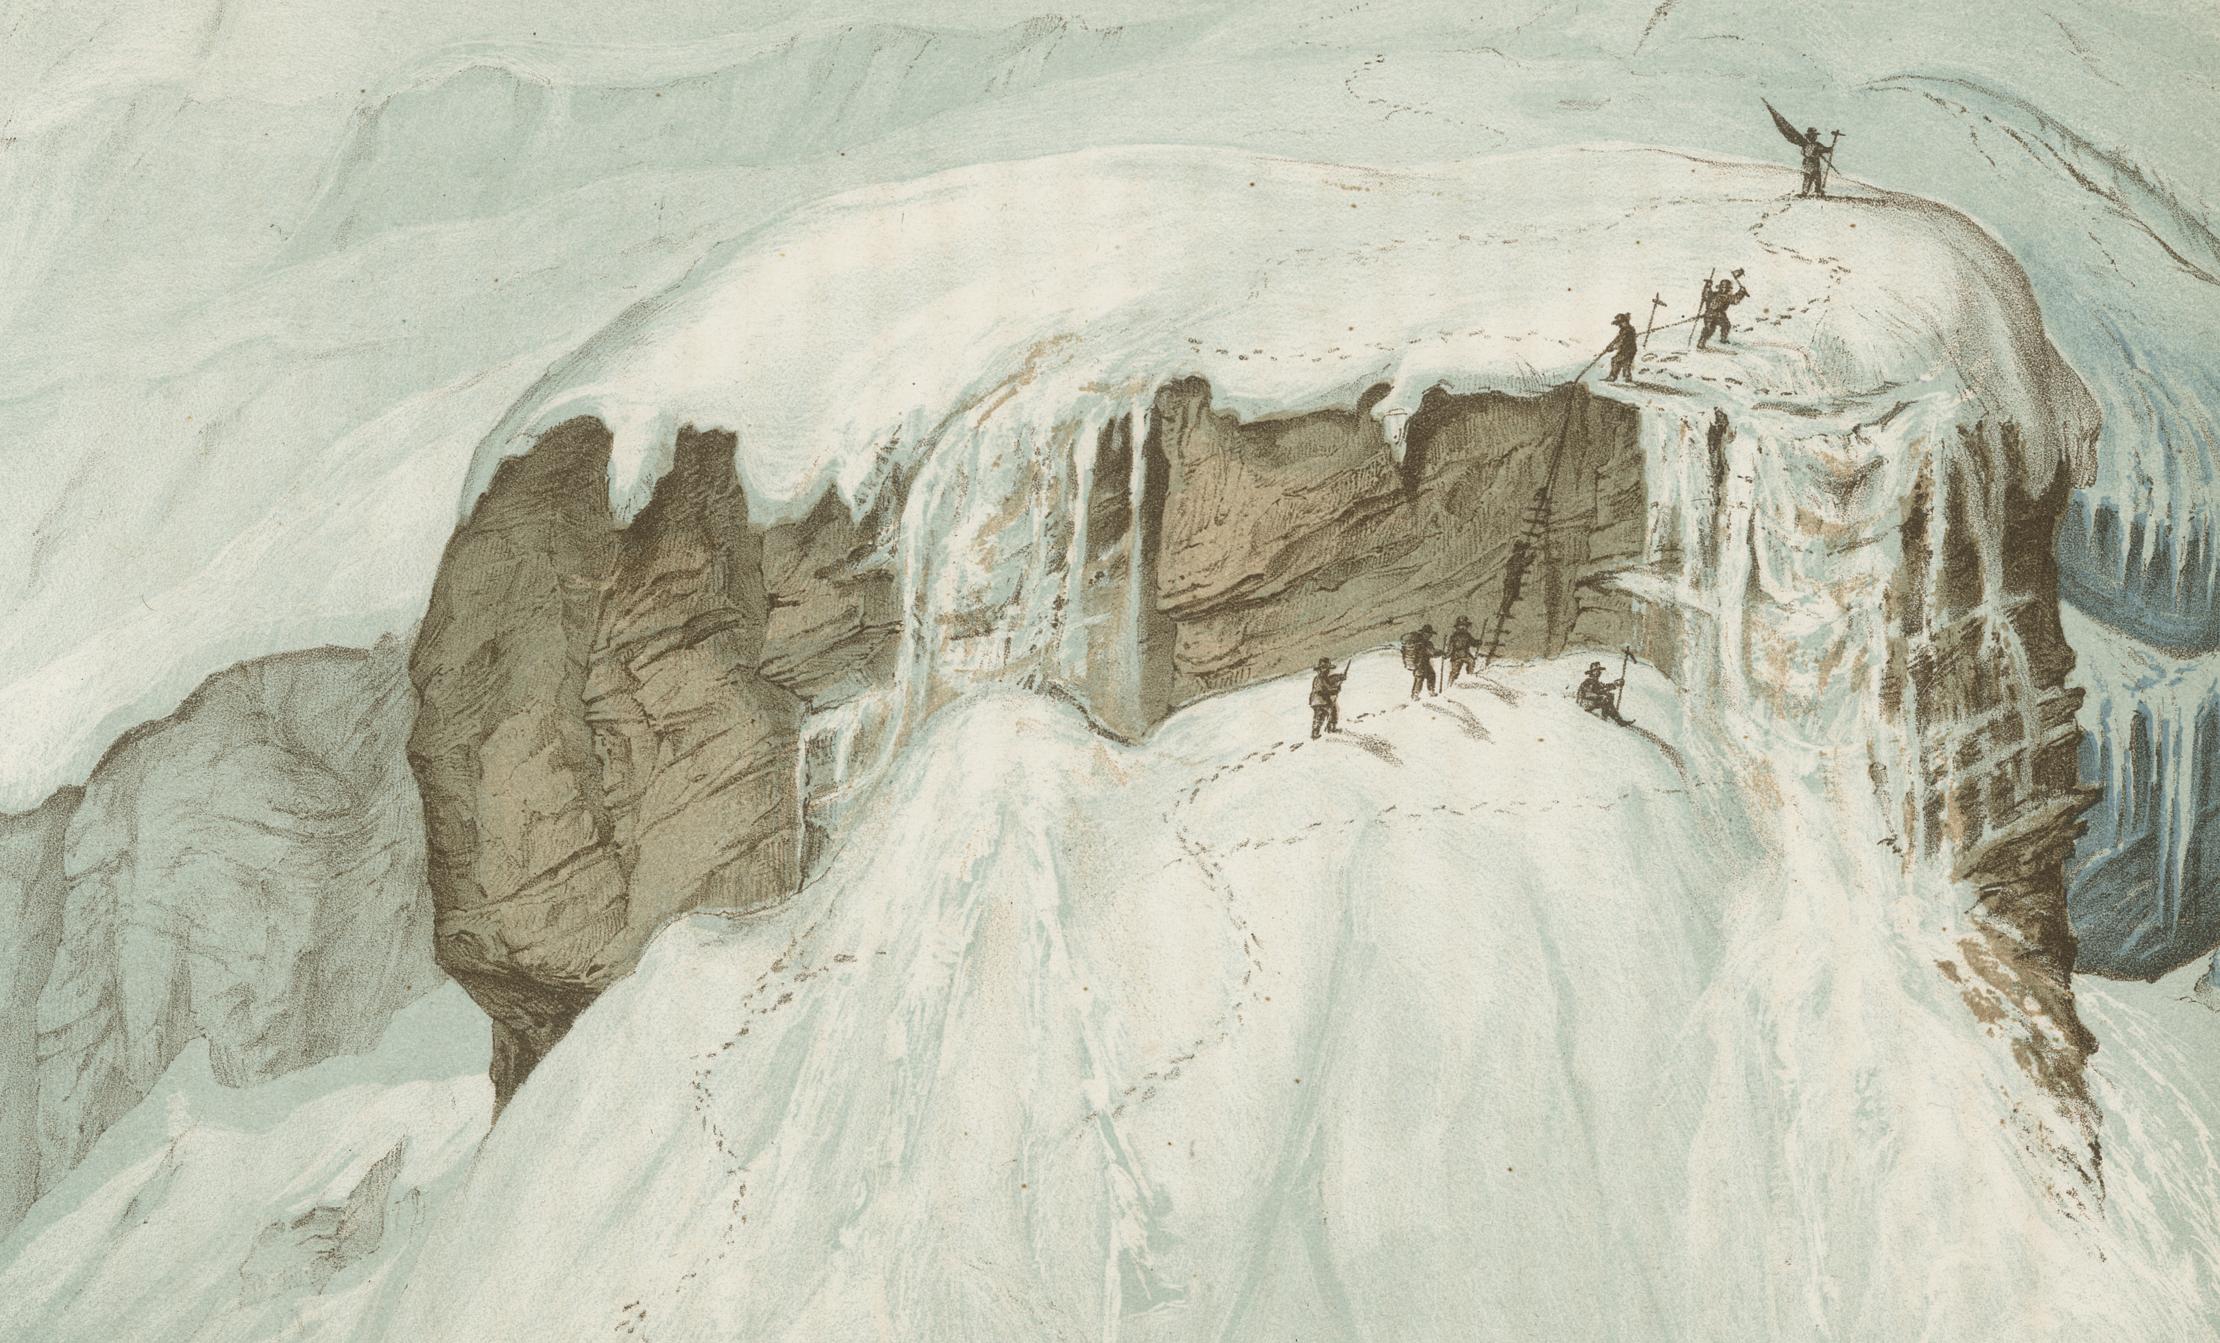 The print “Das Leiterflühli” from the book “Doldenhorn und Weisse Frau” (1863) is part of the SAC Library’s holdings on the history of mountaineering.